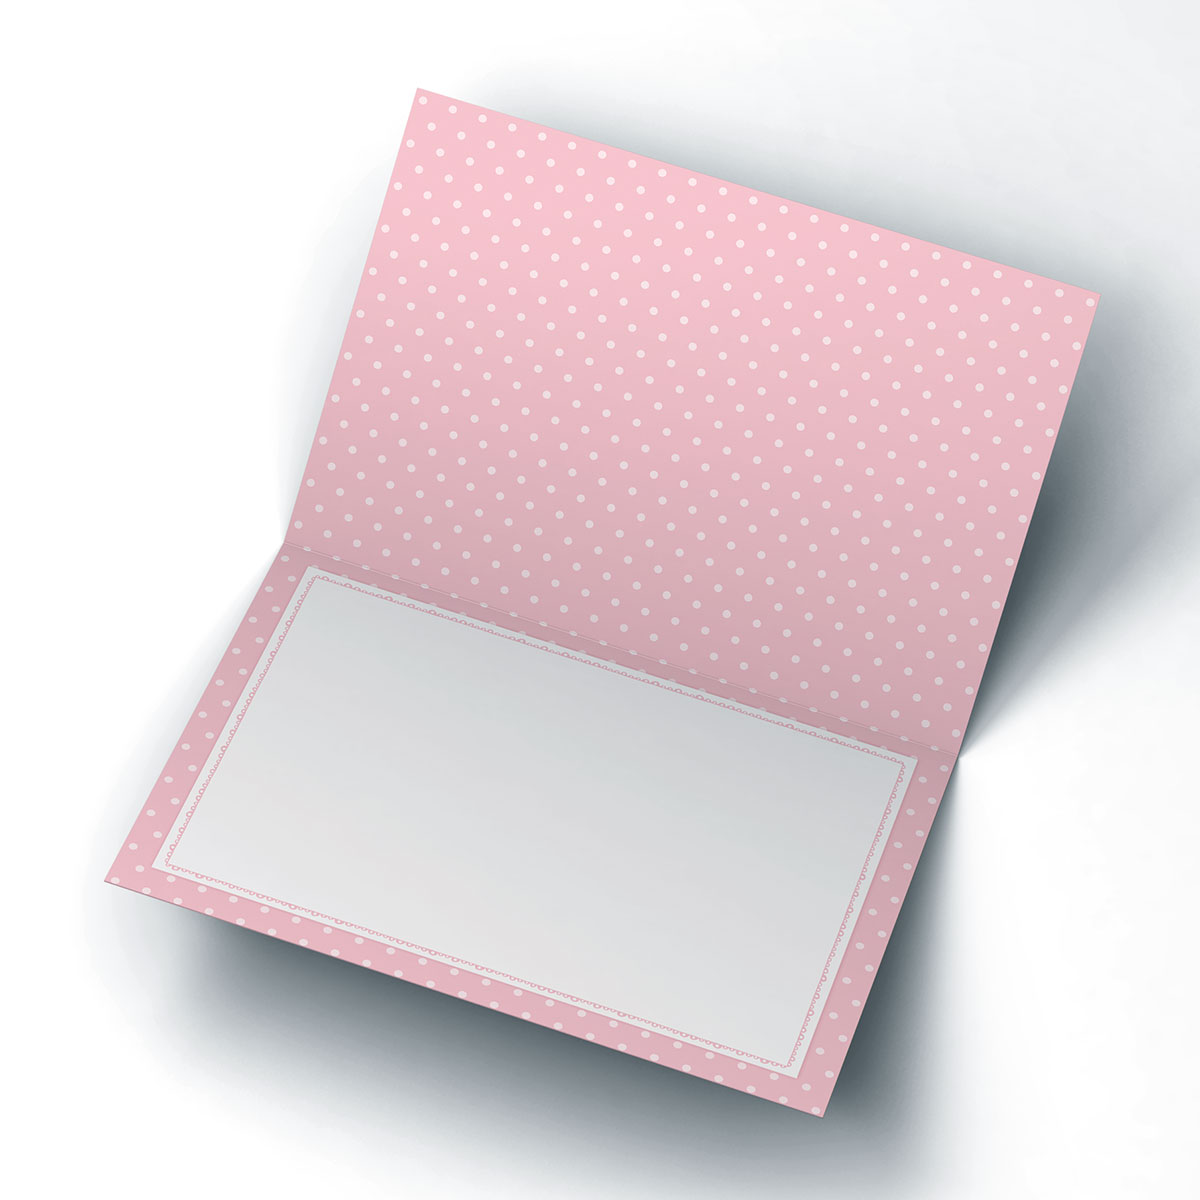 Personalised Mother's Day Card - Pink House Polka Dots